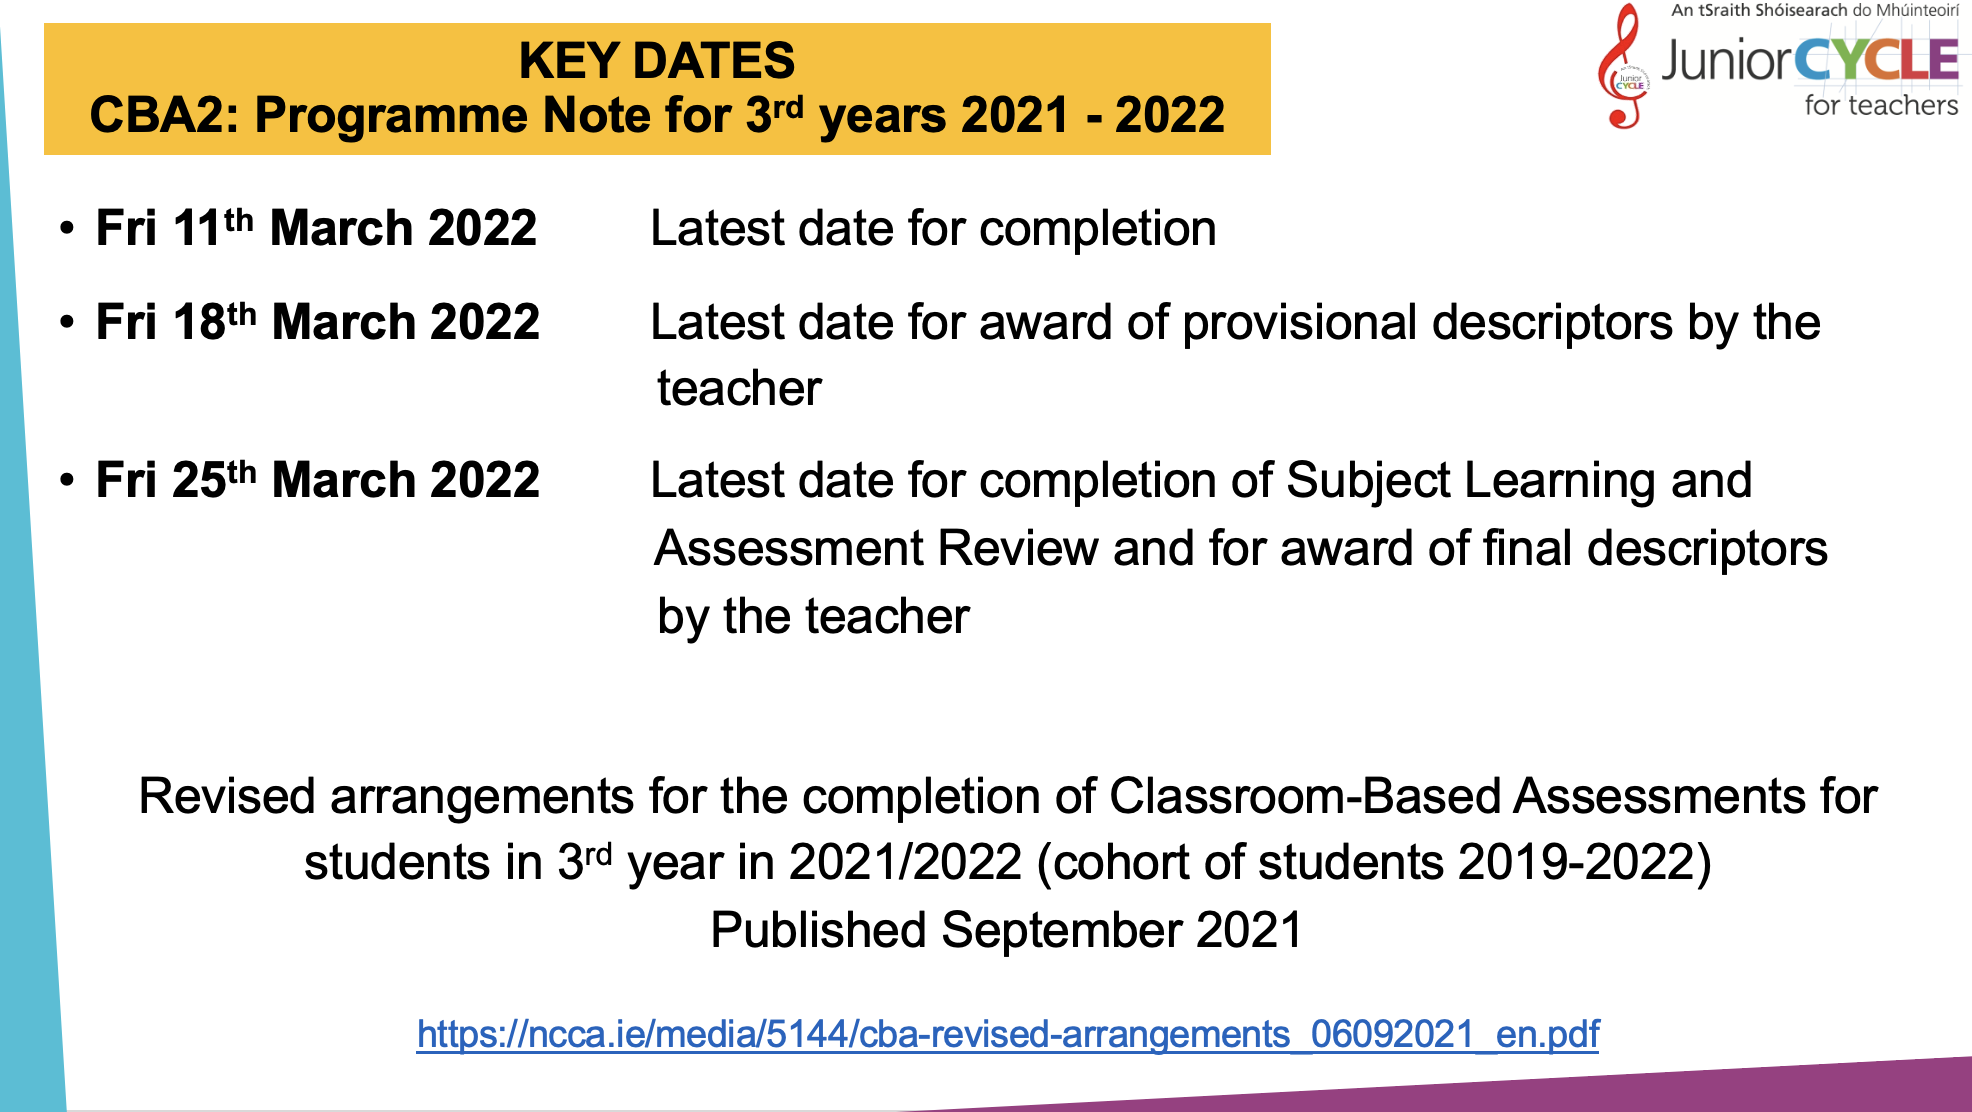 CBA2: Programme Note for 3rd years 2021 - 2022